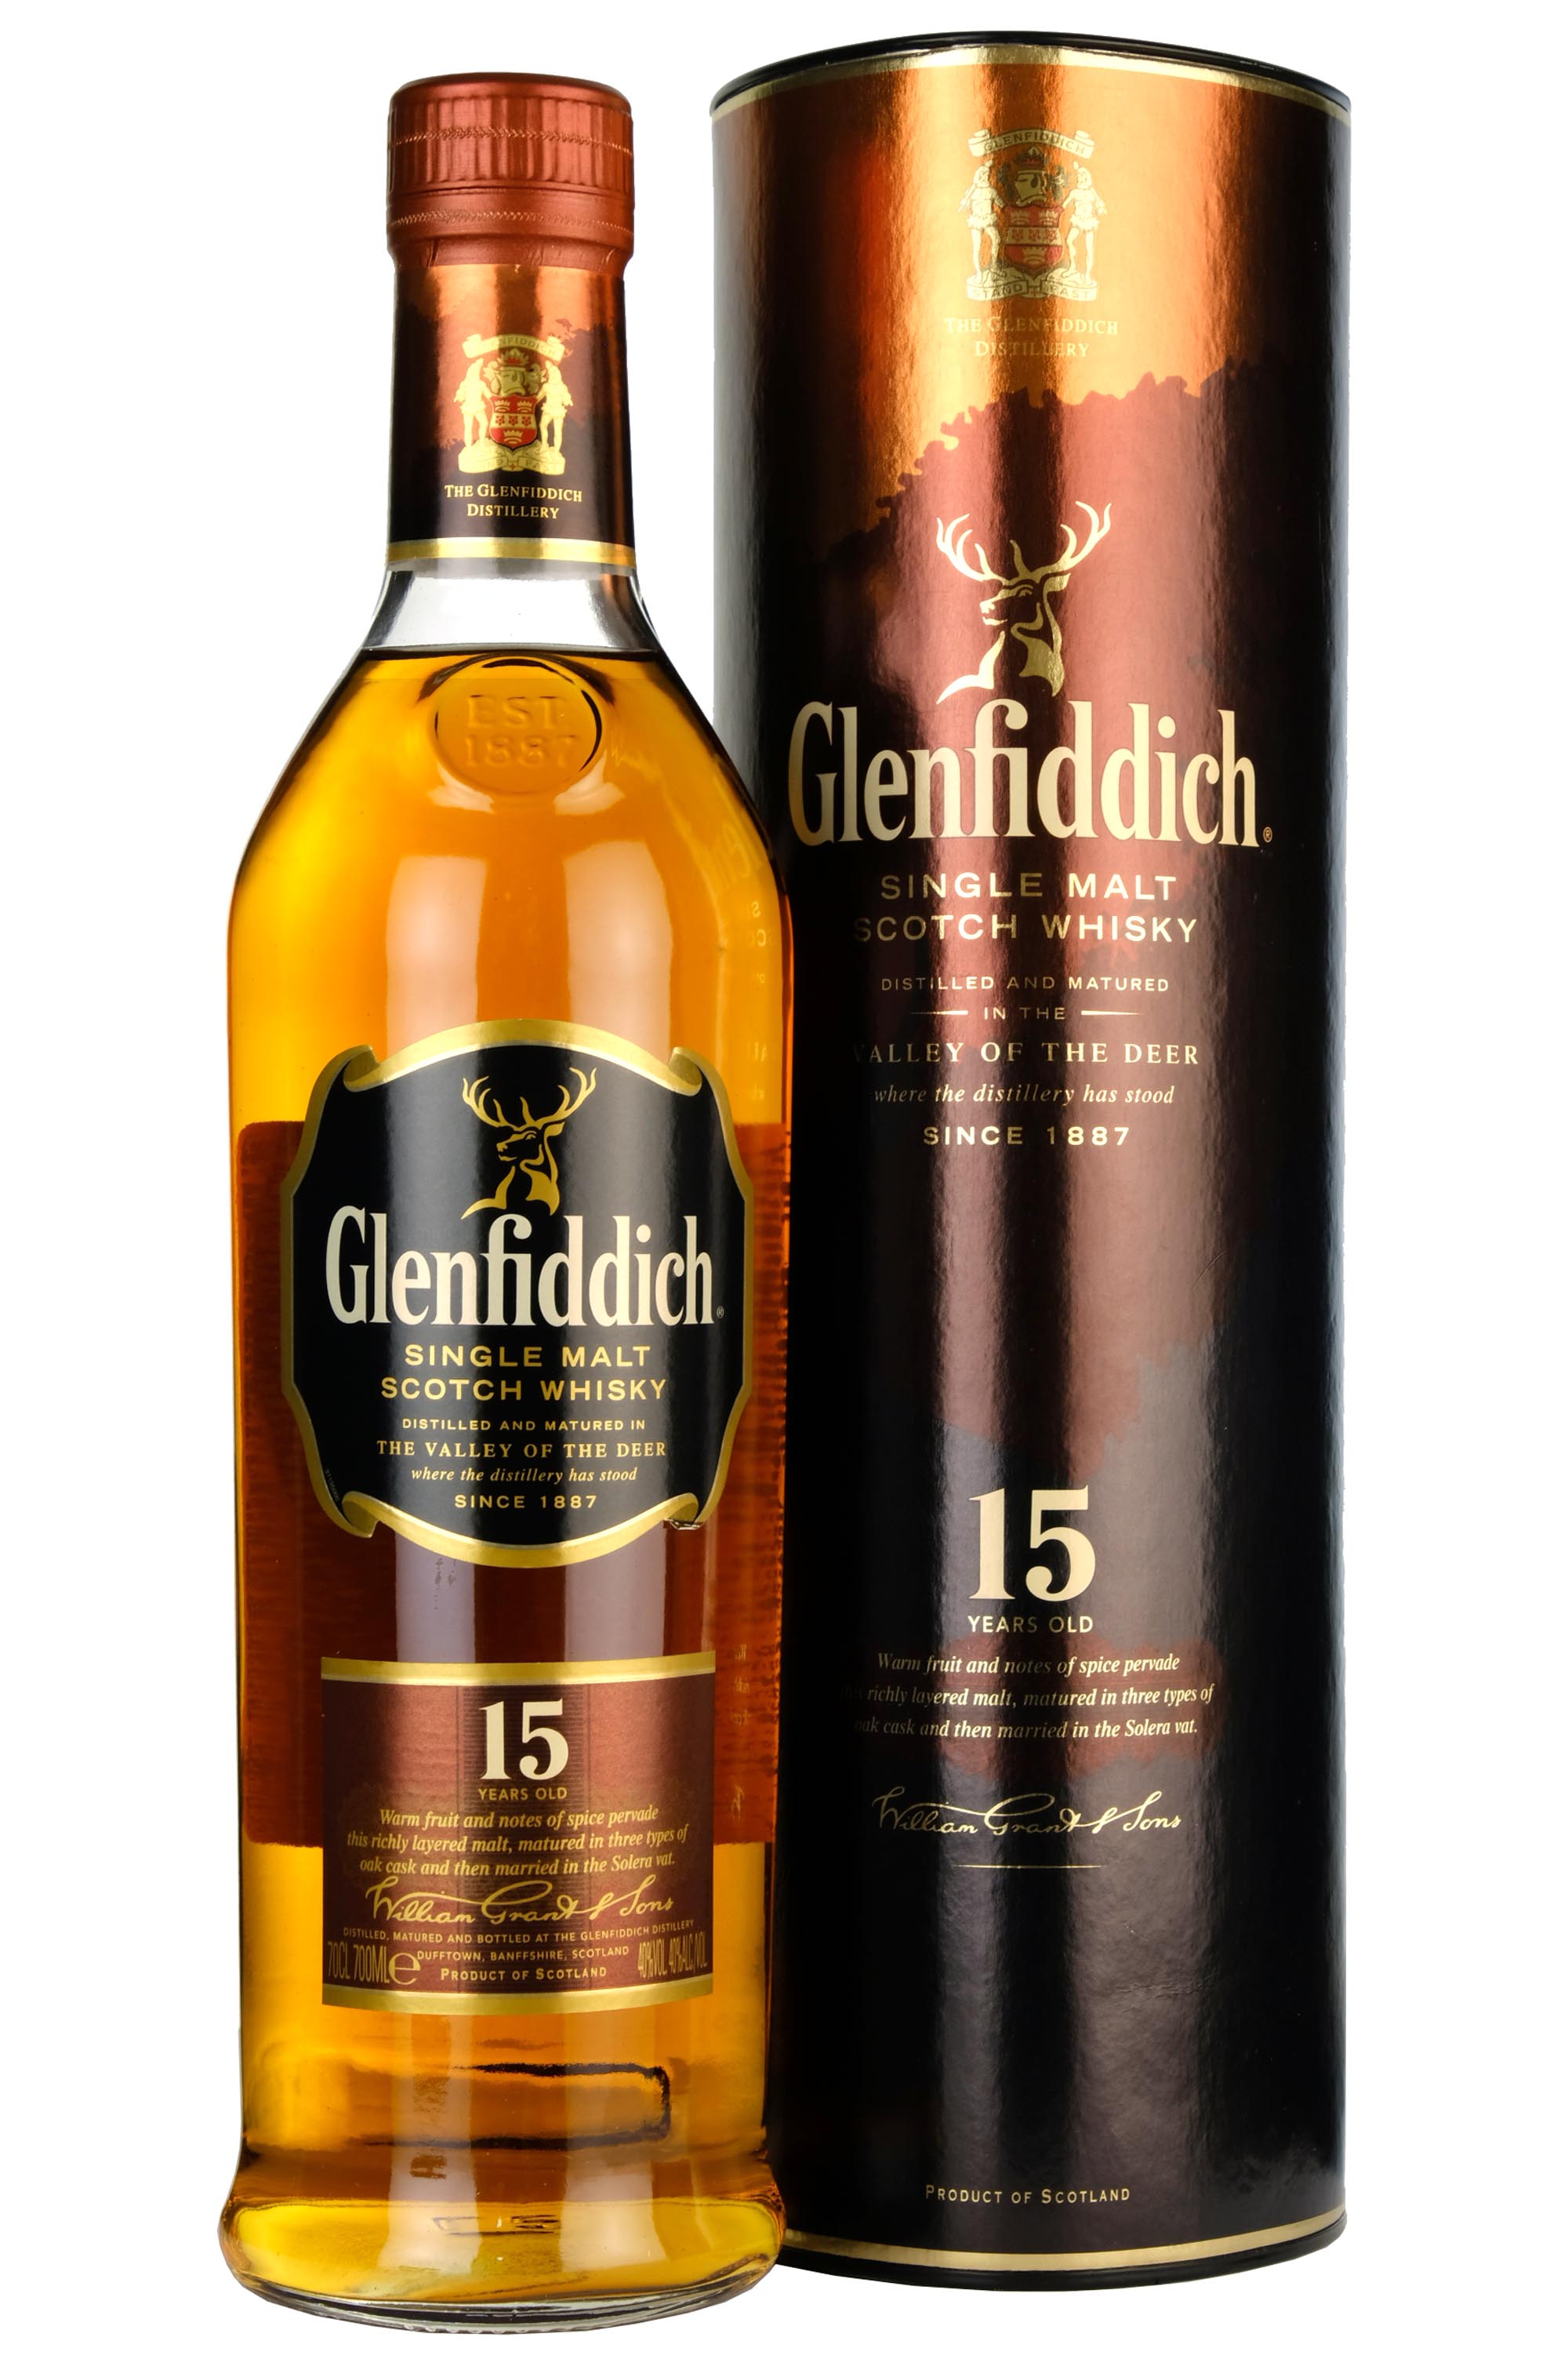 Glenfiddich 15 Year Old Mid 2000s